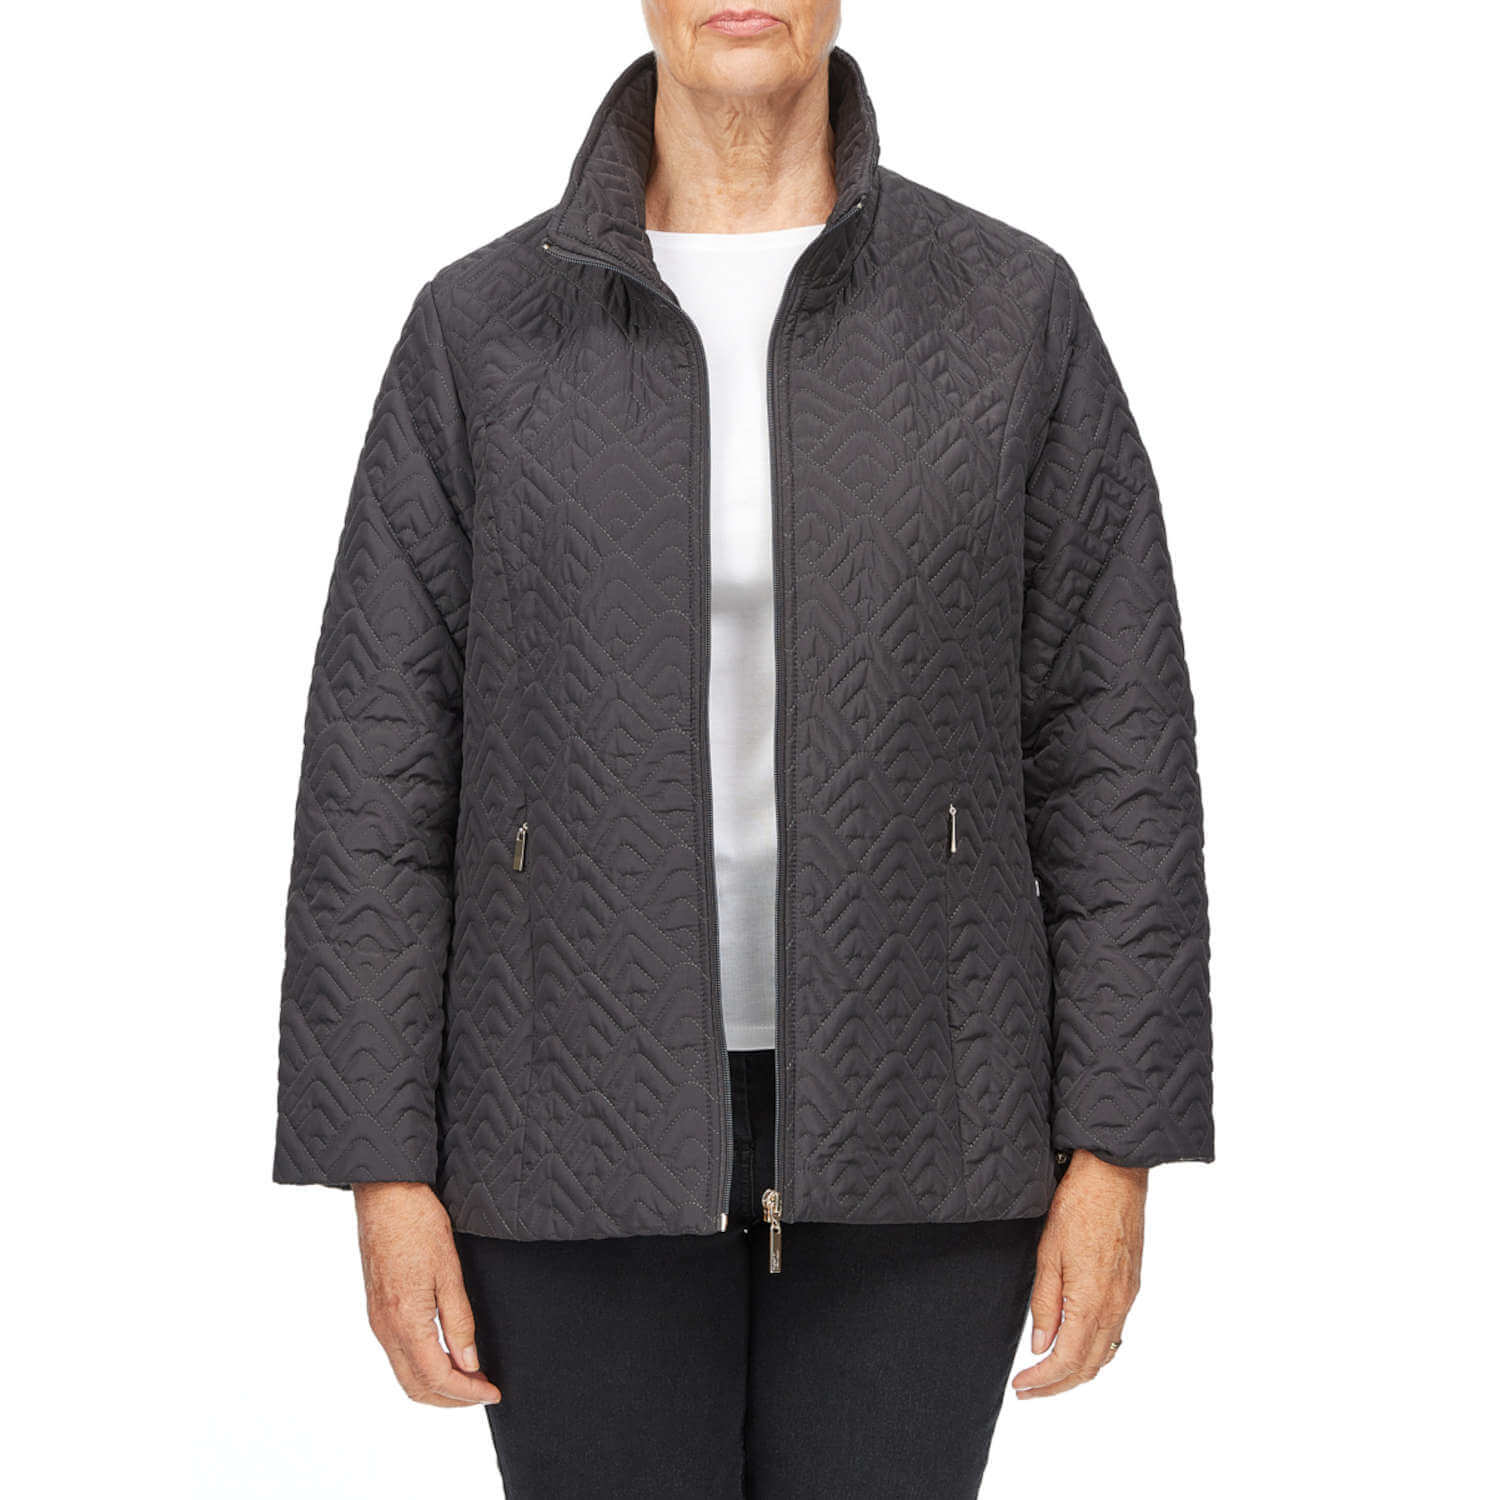 Tigiwear Quilted Coat - Charcoal 2 Shaws Department Stores